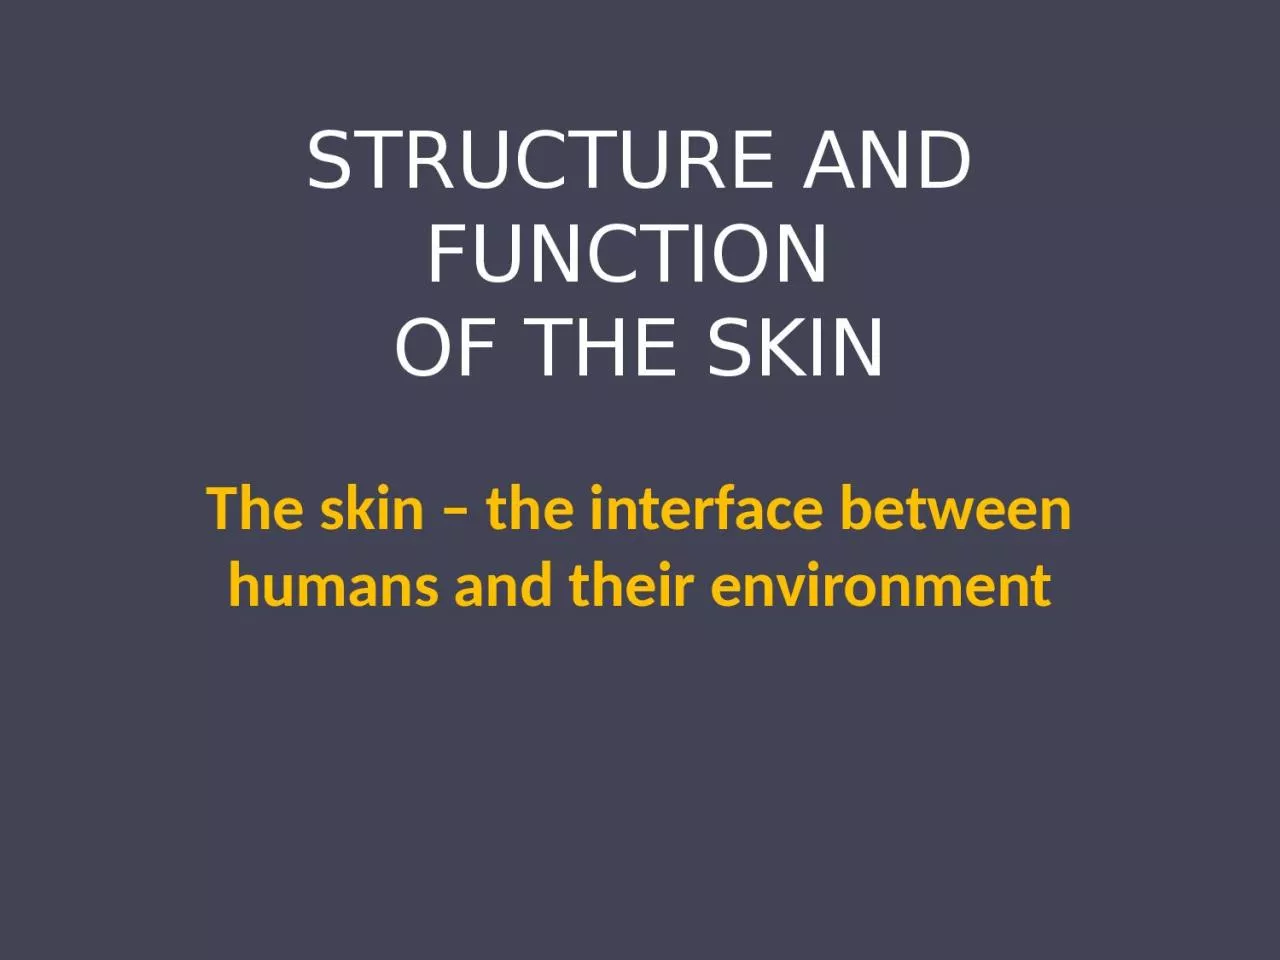 STRUCTURE AND FUNCTION  OF THE SKIN